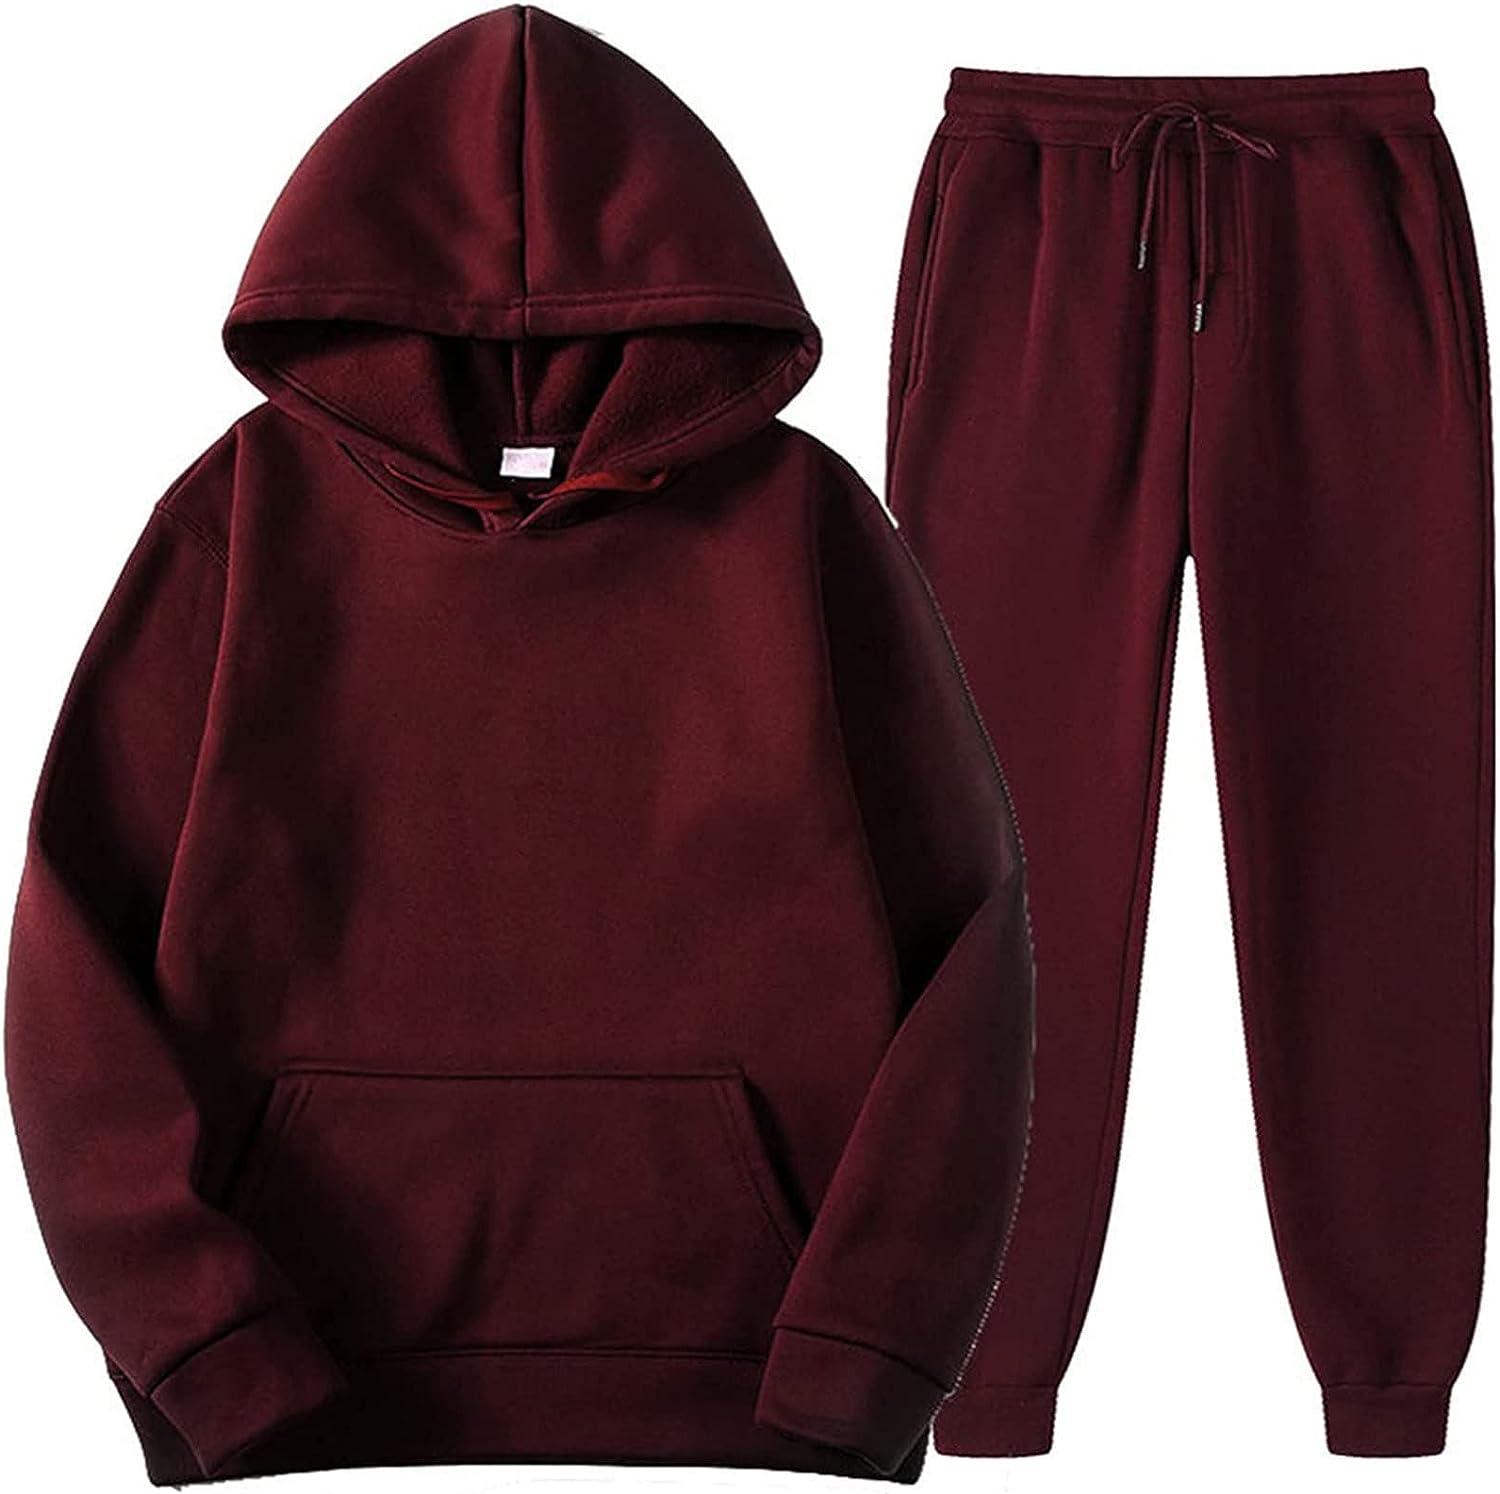 Hoodie Set Women Tracksuit 2 Piece Set Sport Casual Outfit